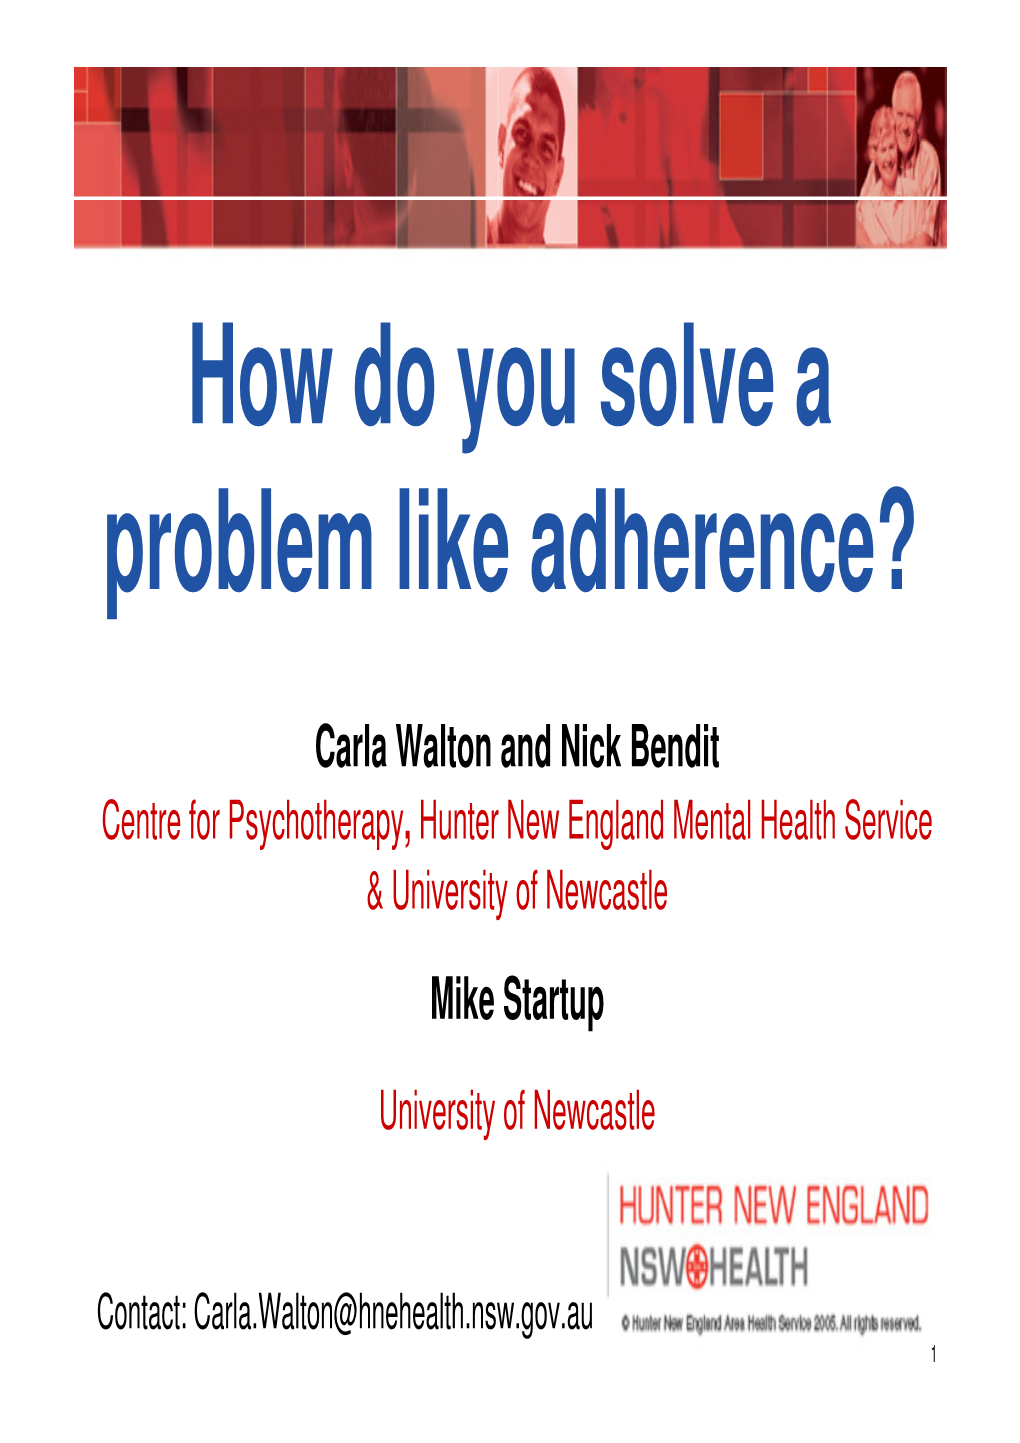 How Do You Solve a Problem Like Adherence?